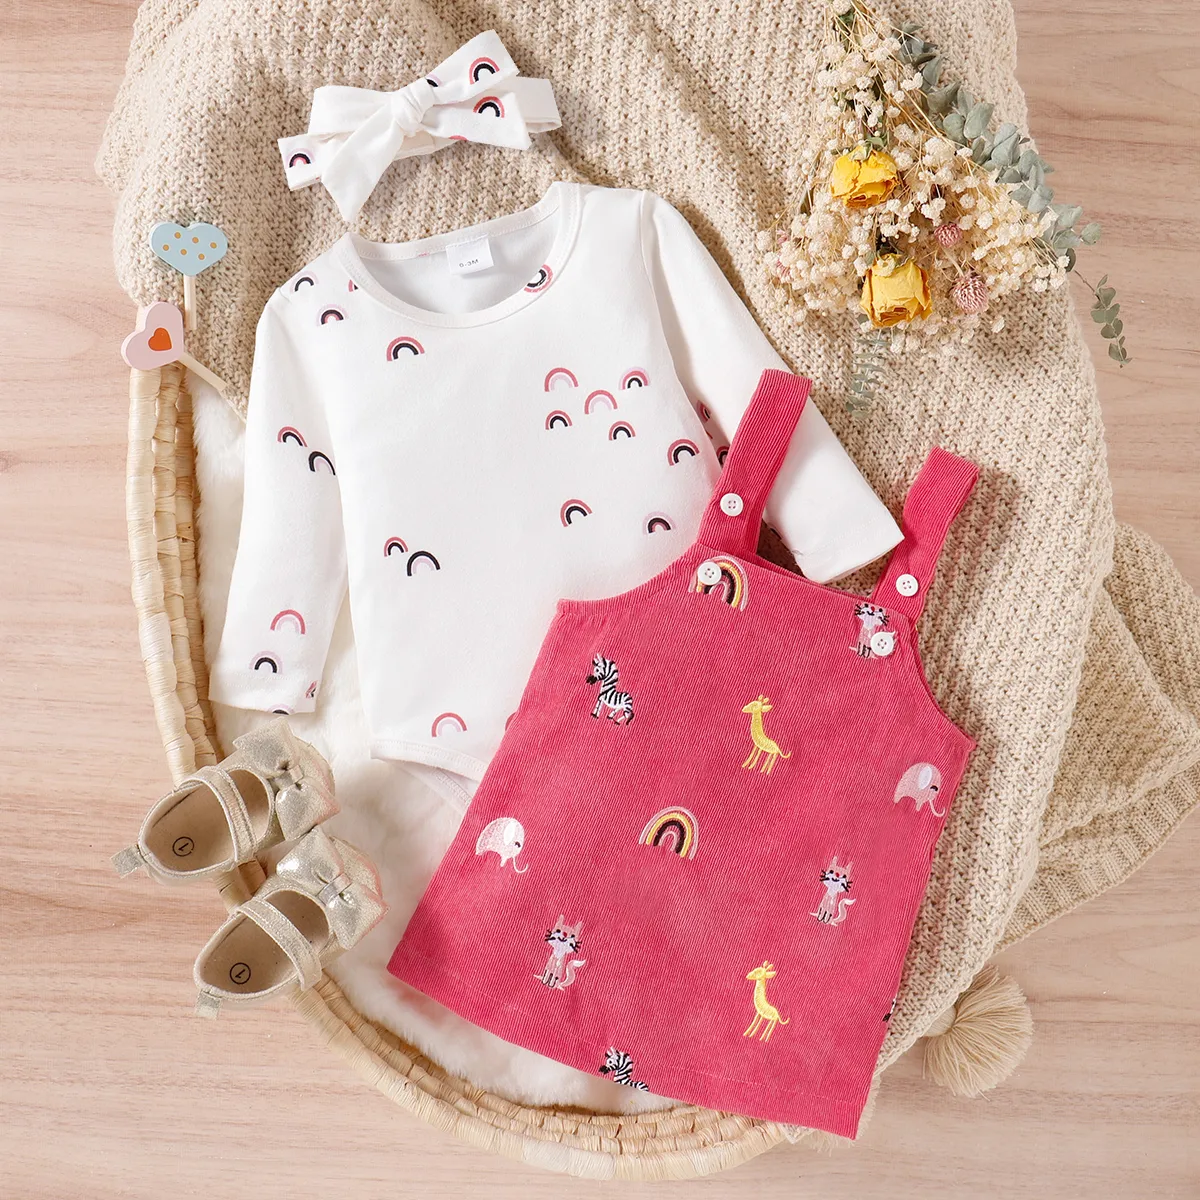 

3pcs Baby Girl Allover Rainbow Print Long-sleeve Romper and Animal Embroidered Corduroy Overall Dress with Headband Set